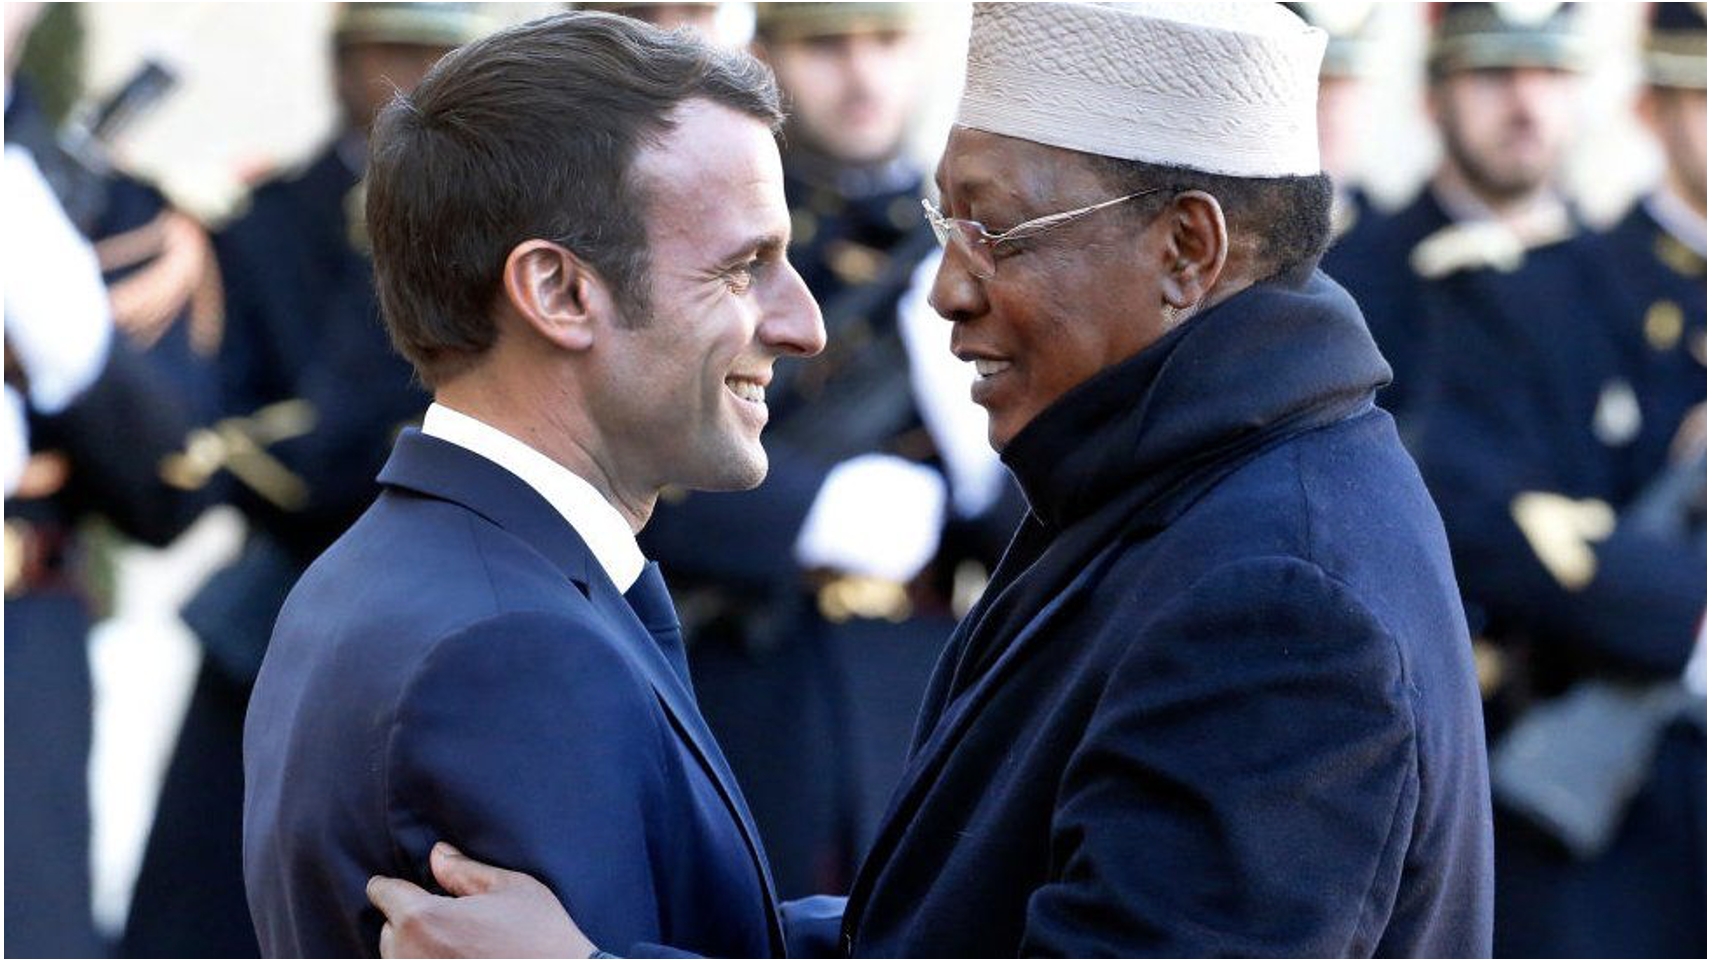 What role did France play in the death of Idriss Déby